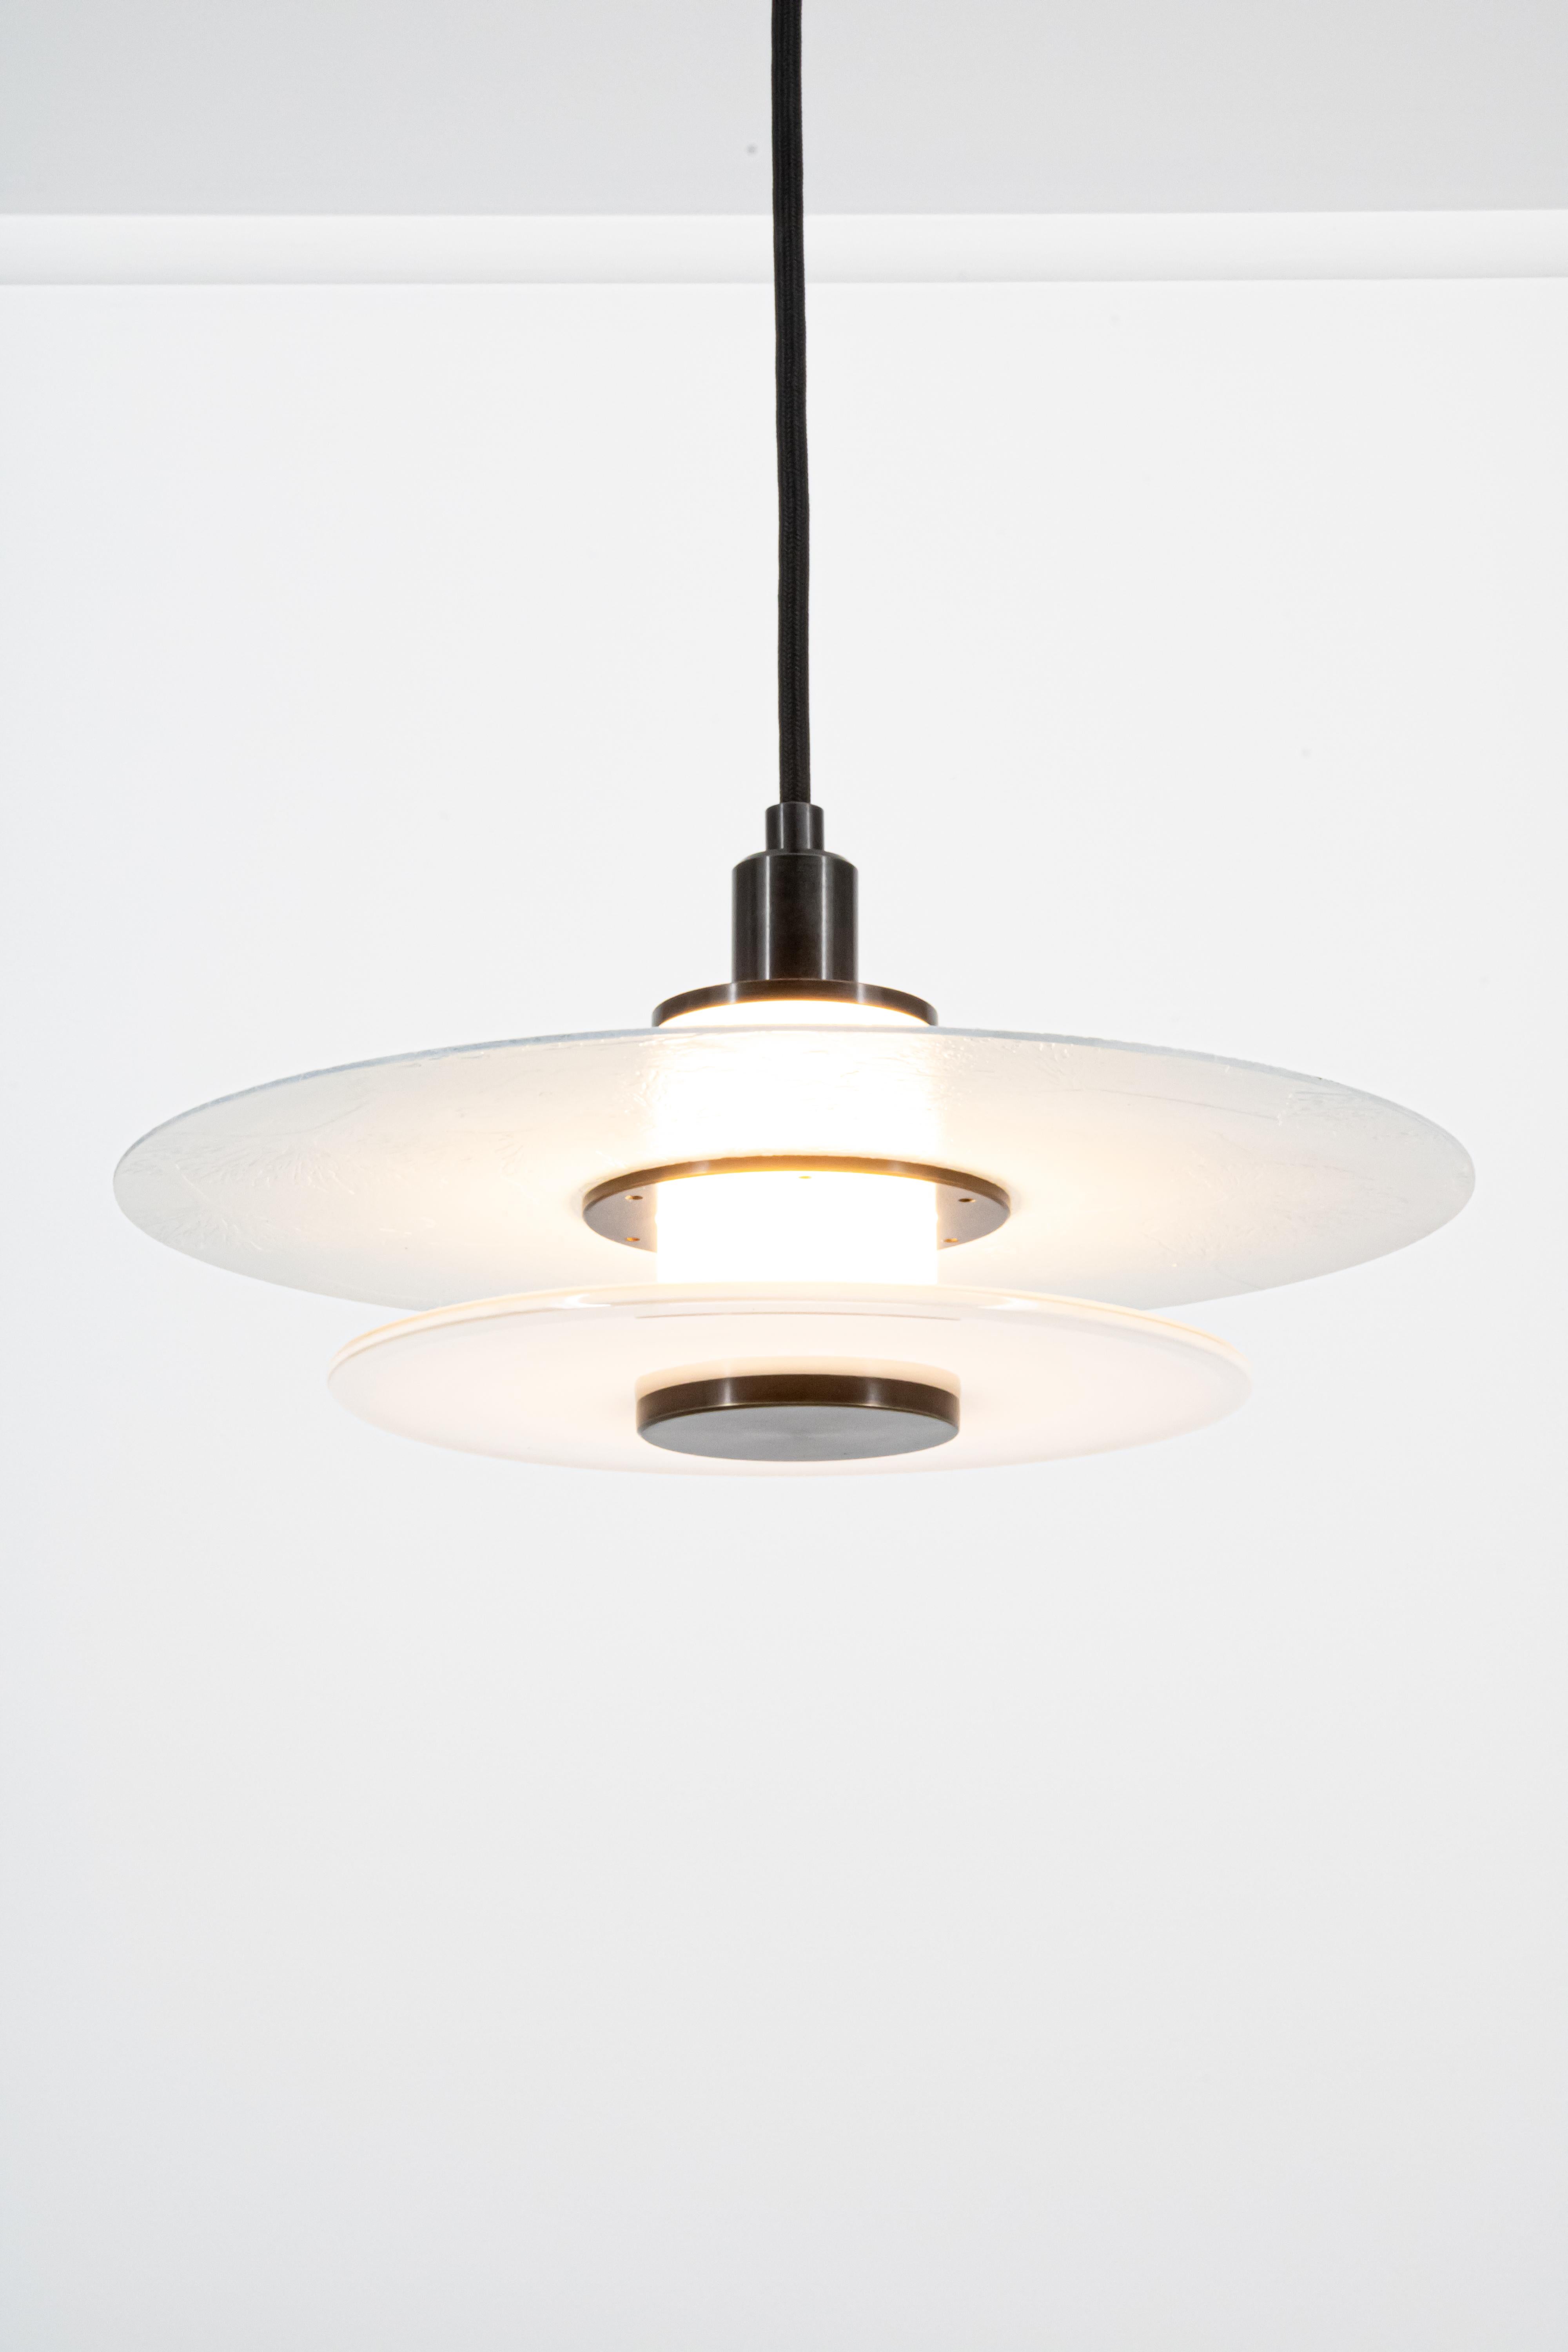 Klein Pendant w/ Milk Glass, Etched Ginkgo in Two Tone Blackened Brass For Sale 10